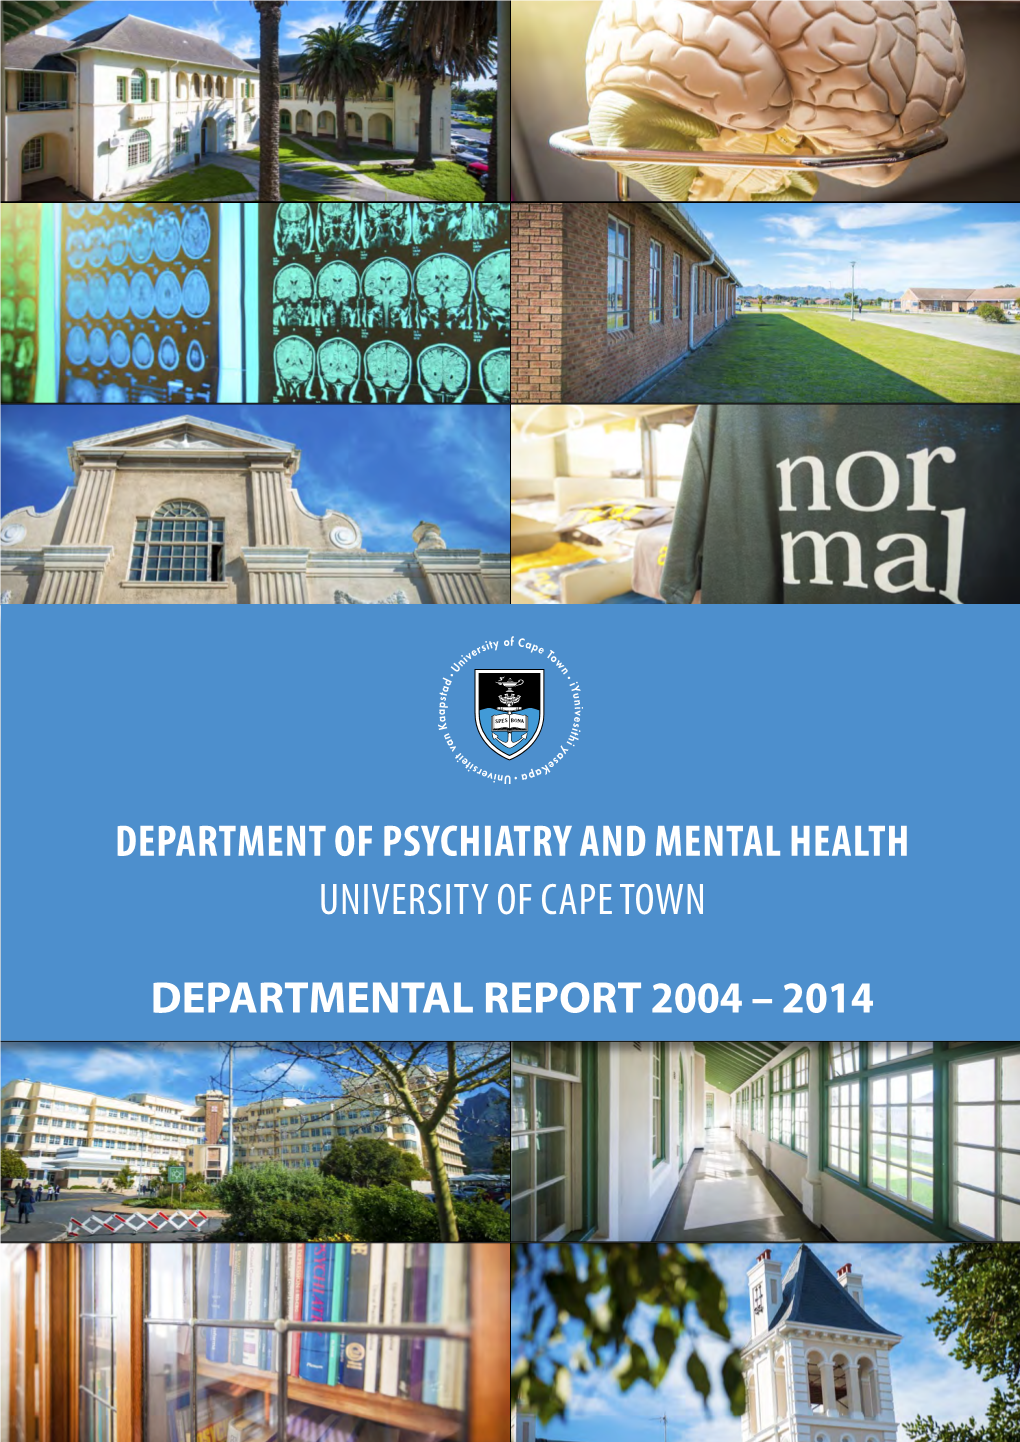 Department of Psychiatry and Mental Health University of Cape Town Departmental Report 2004